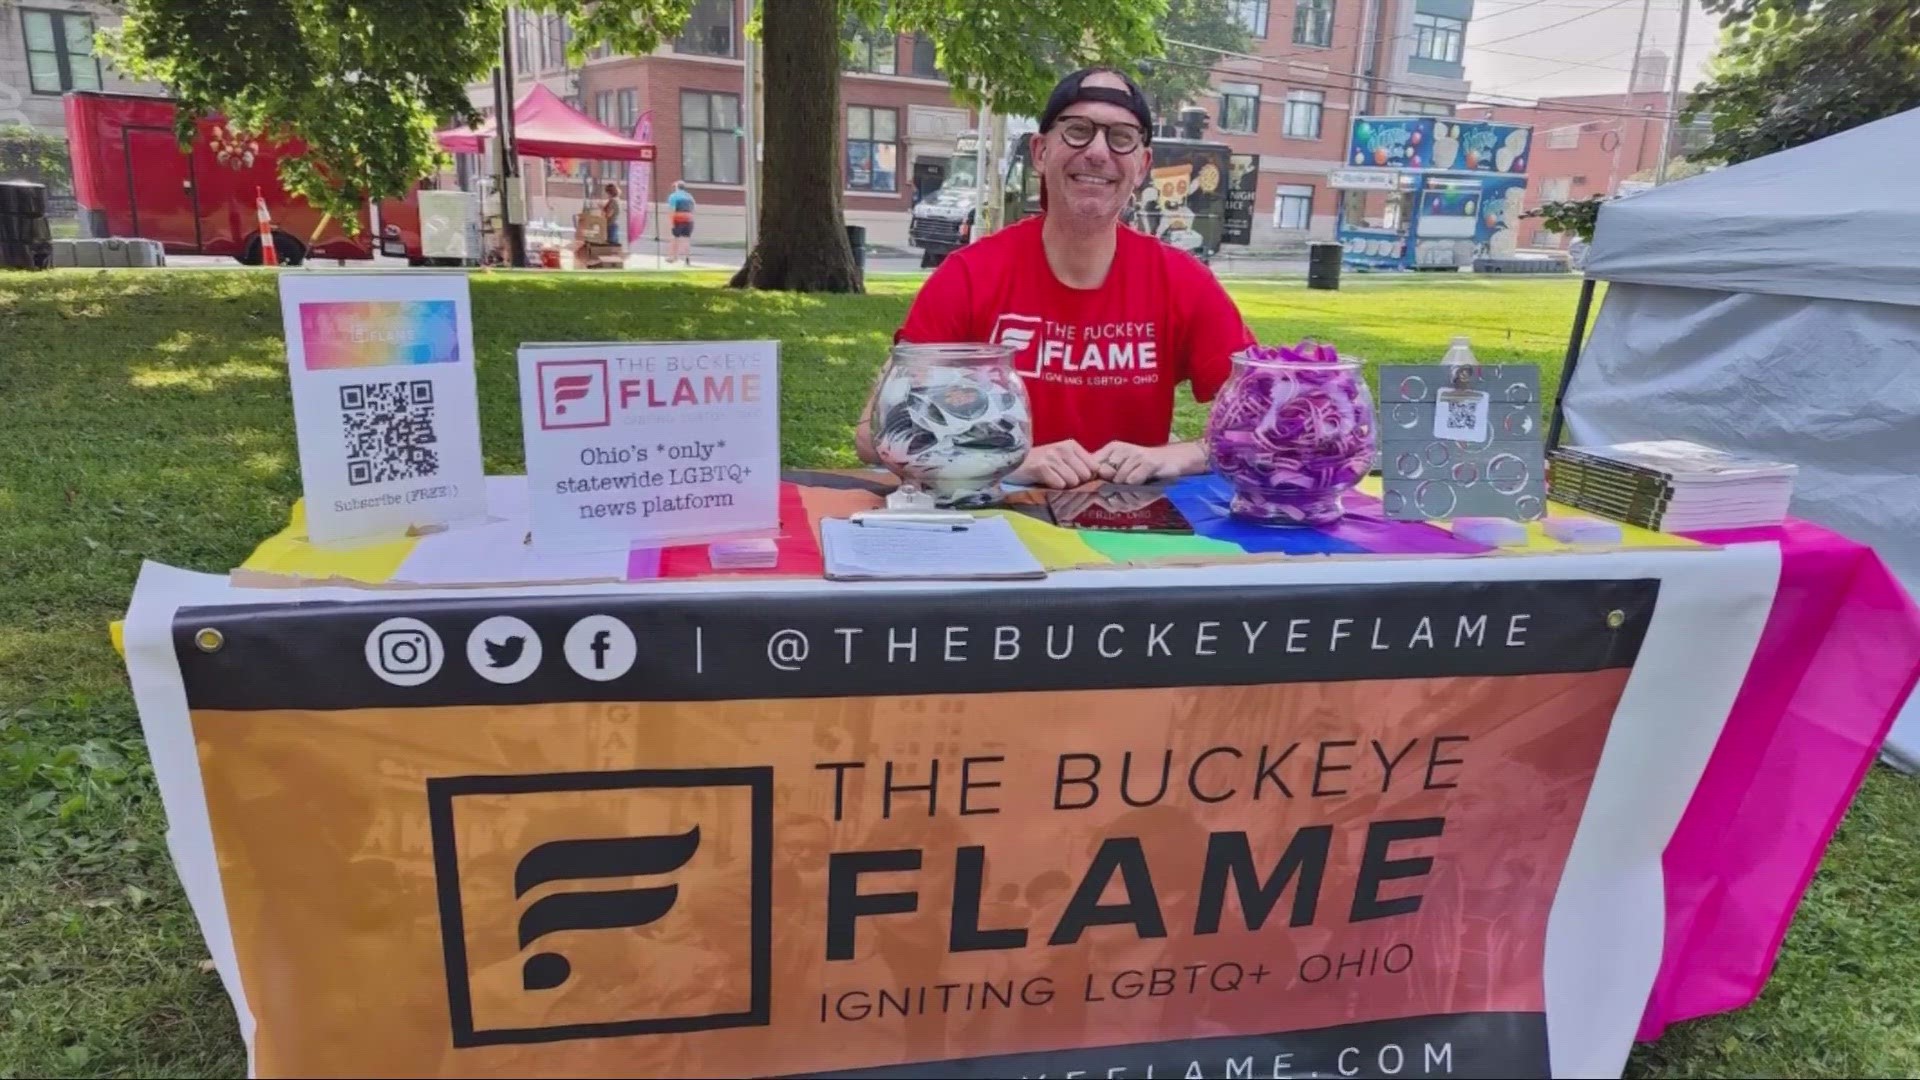 Ken Schneck became the editor of the Buckeye Flame three years ago, but he didn't know all that he'd be leaving behind.